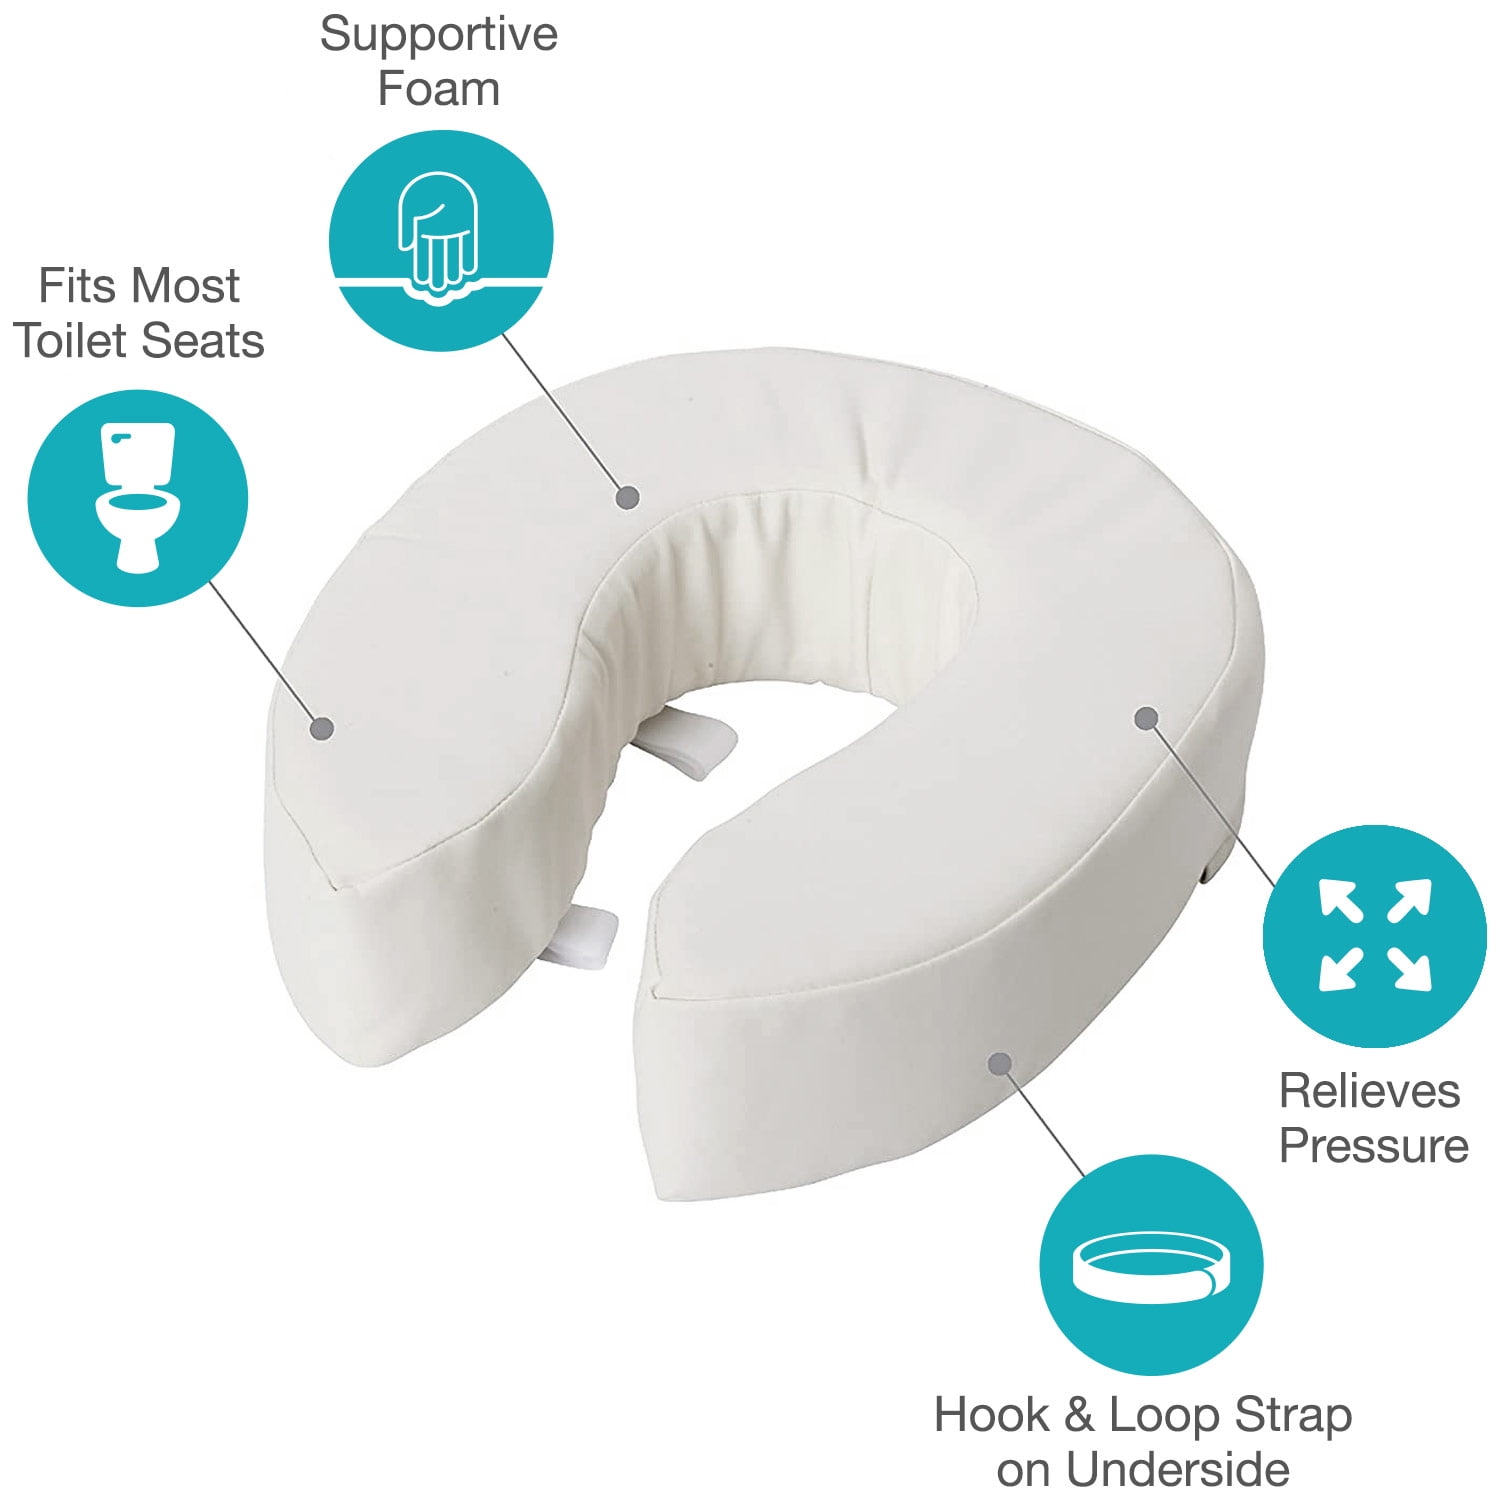 DMI Vinyl Cushion 4 in. Round Front Toilet Seat in White 520-1247-1900 -  The Home Depot